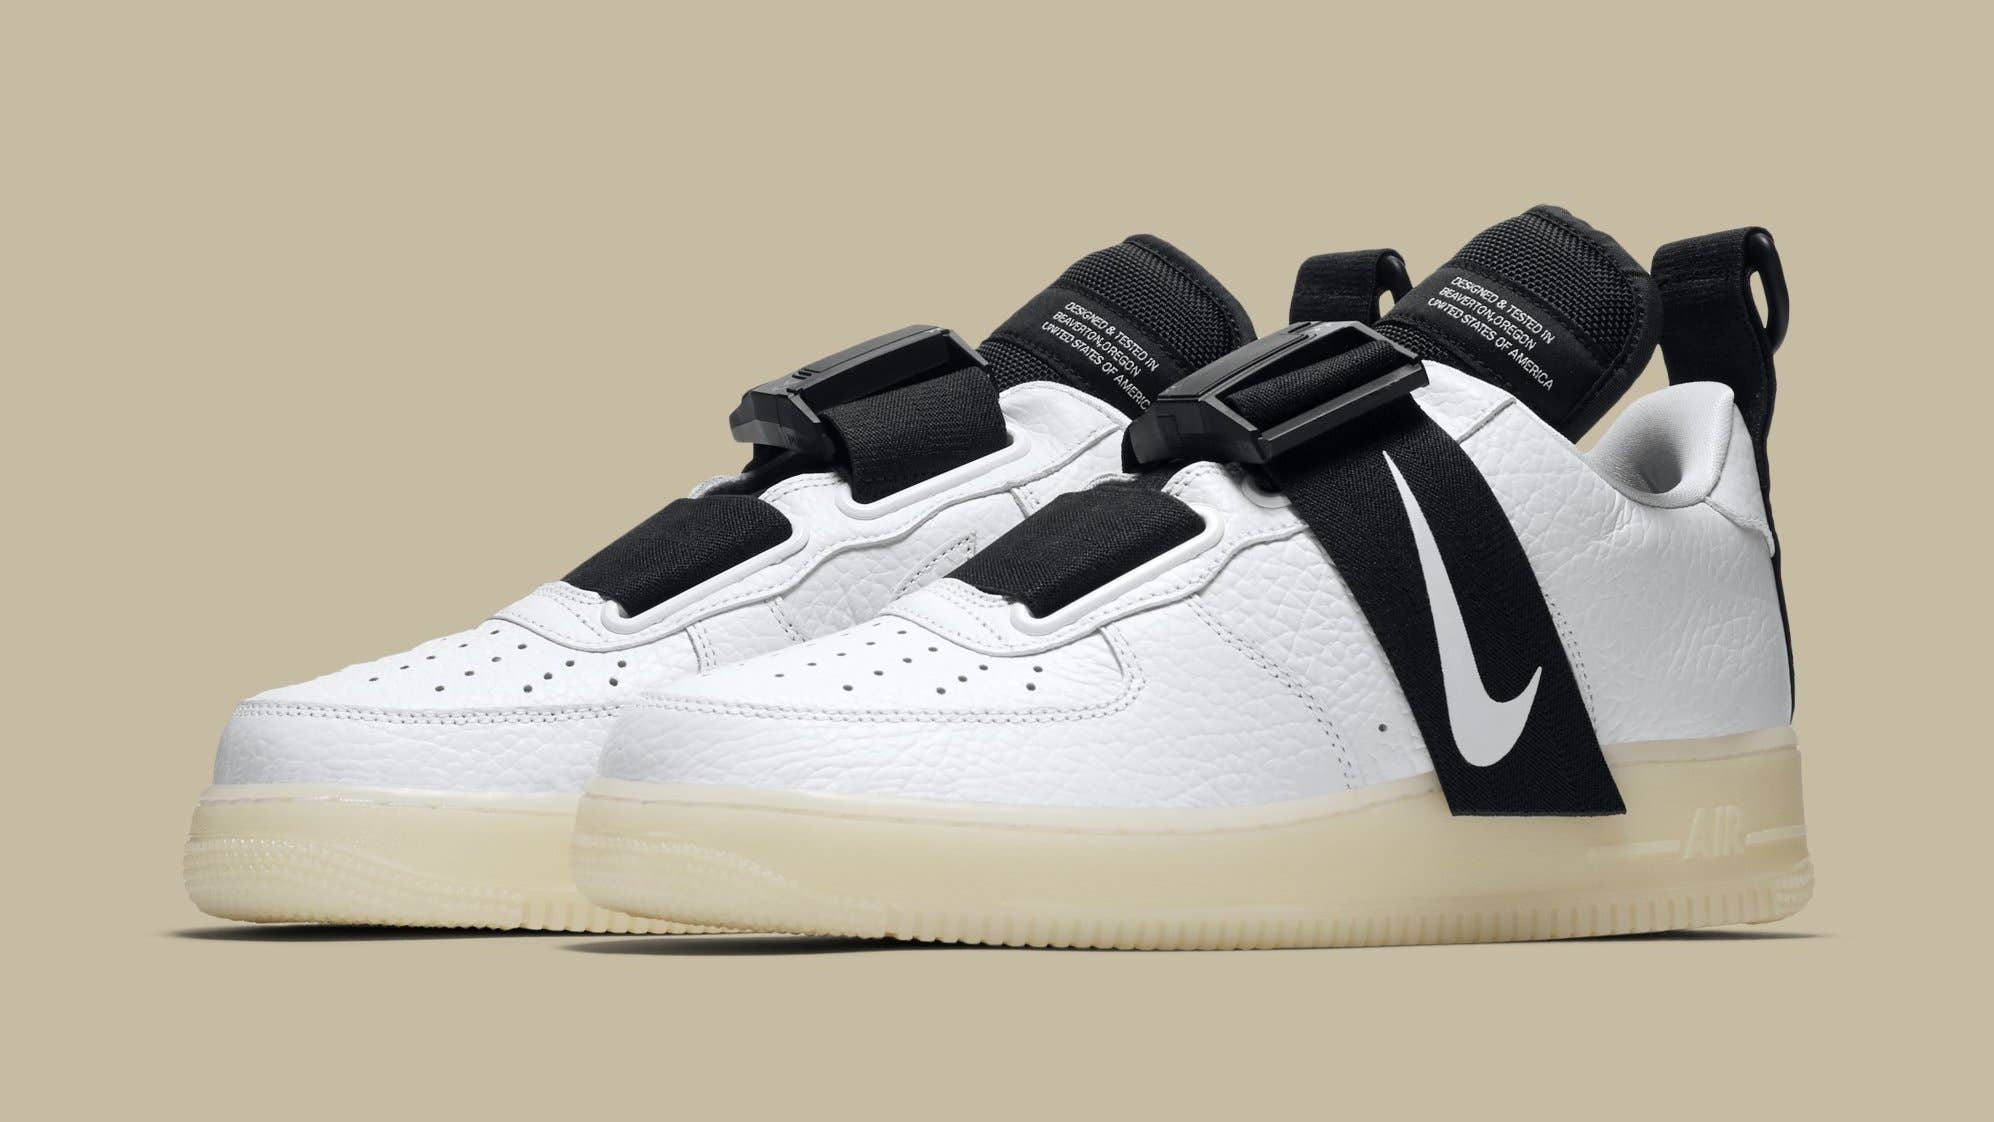 The Nike Air Force 1 Utility Debuts This Complex